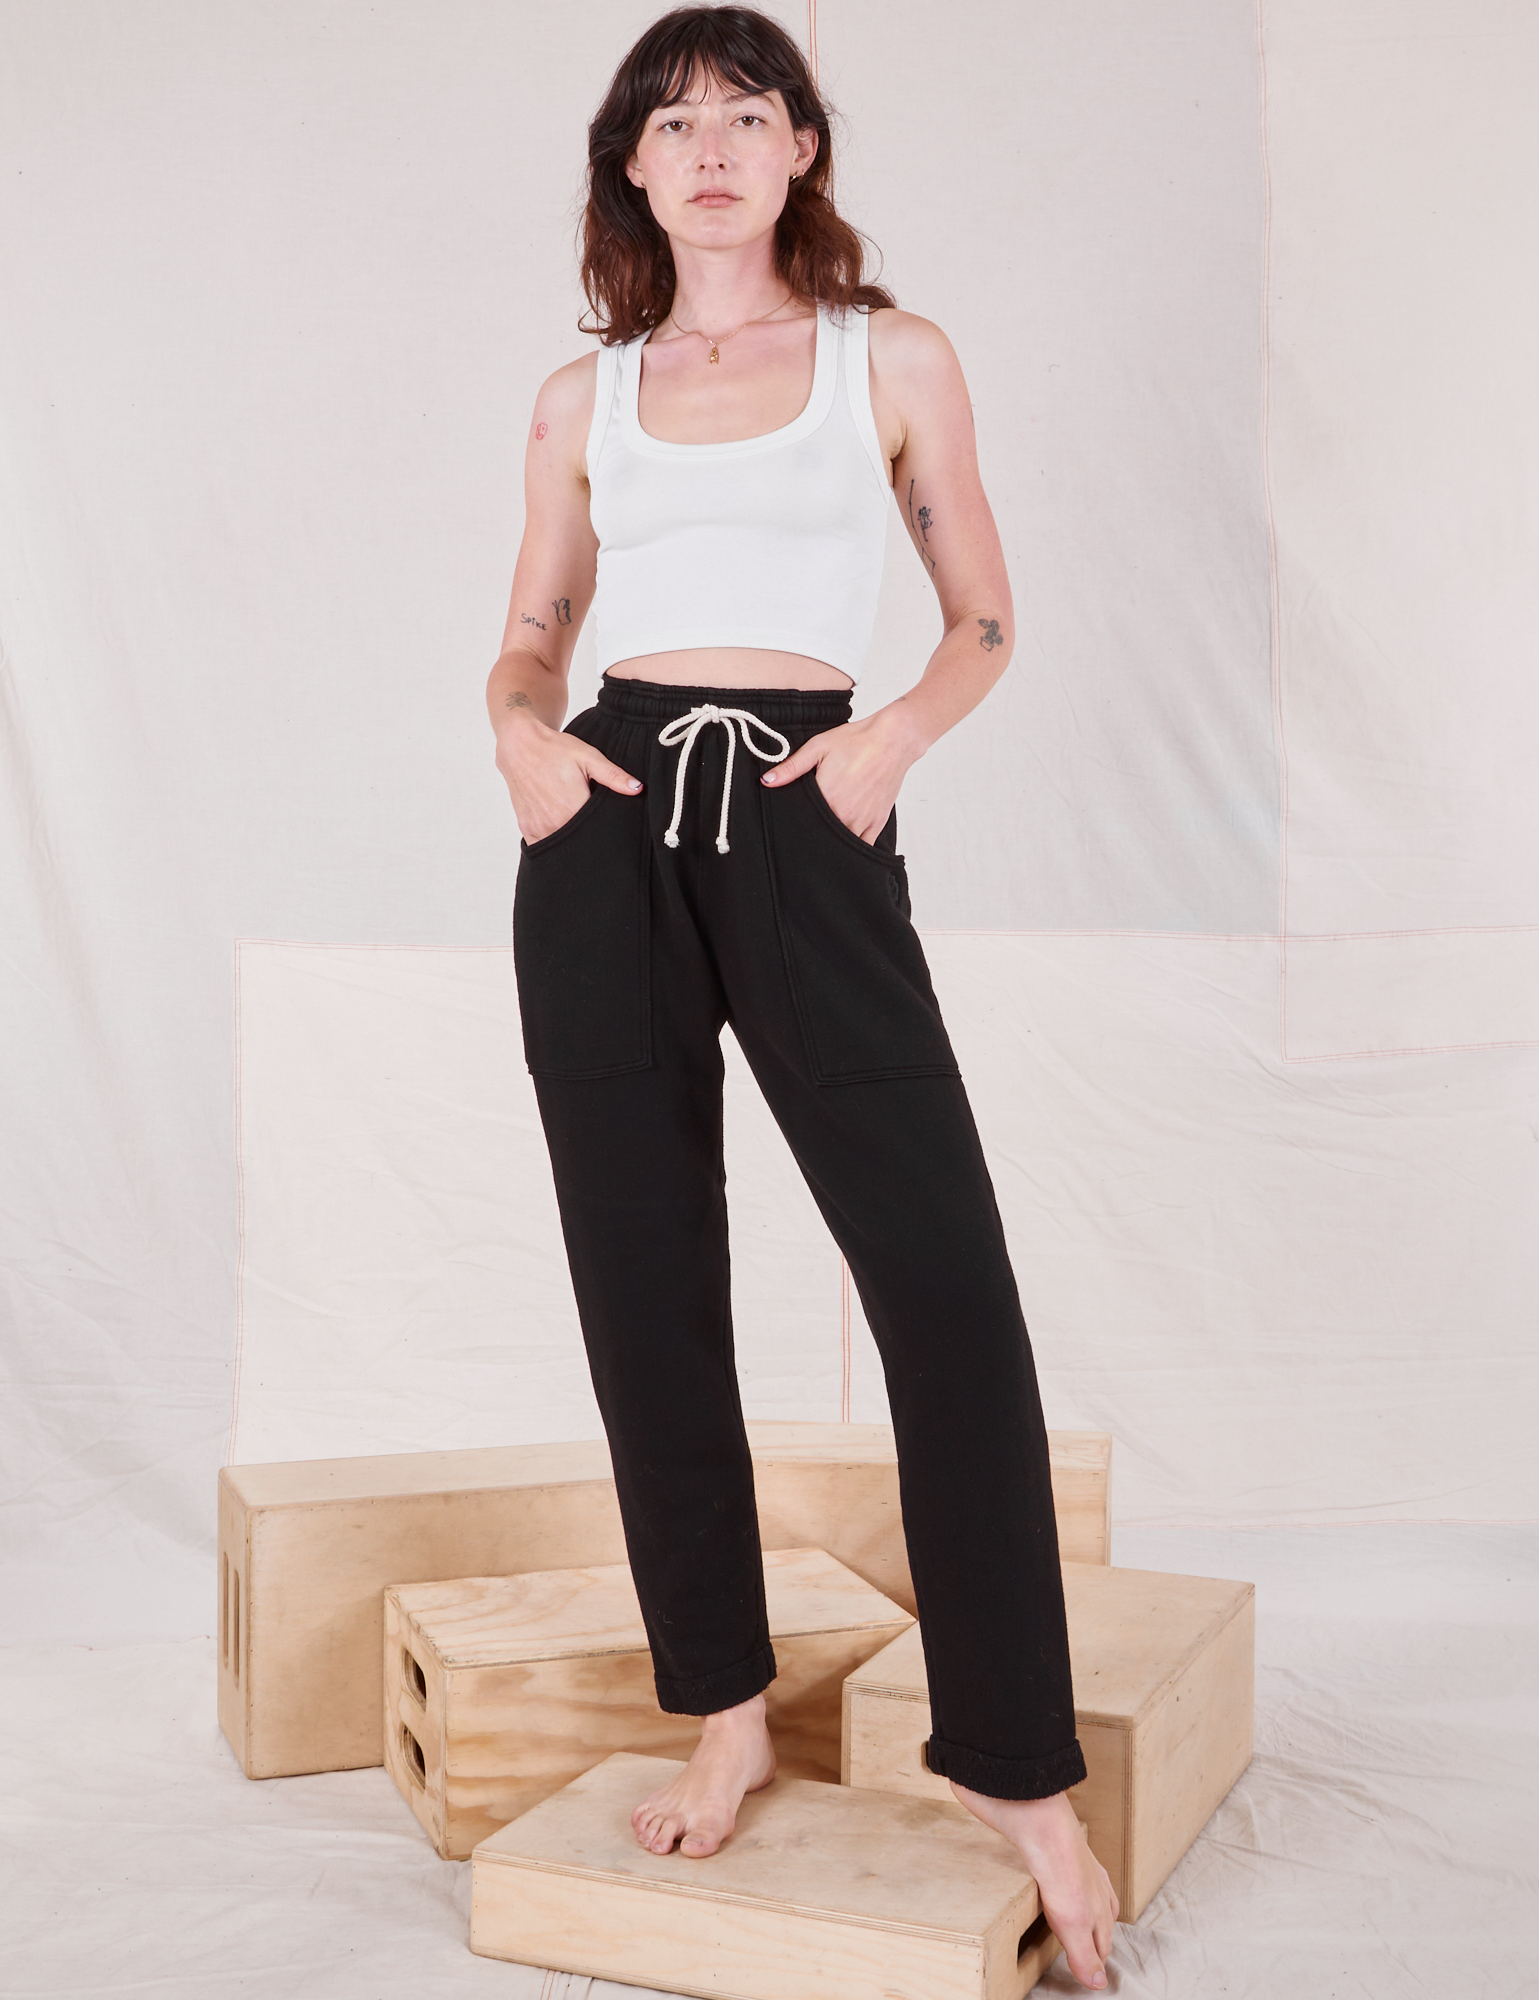 Alex is 5'8" and wearing P Rolled Cuff Sweat Pants in Basic Black paired with Cropped Tank in  vintage tee off-white 